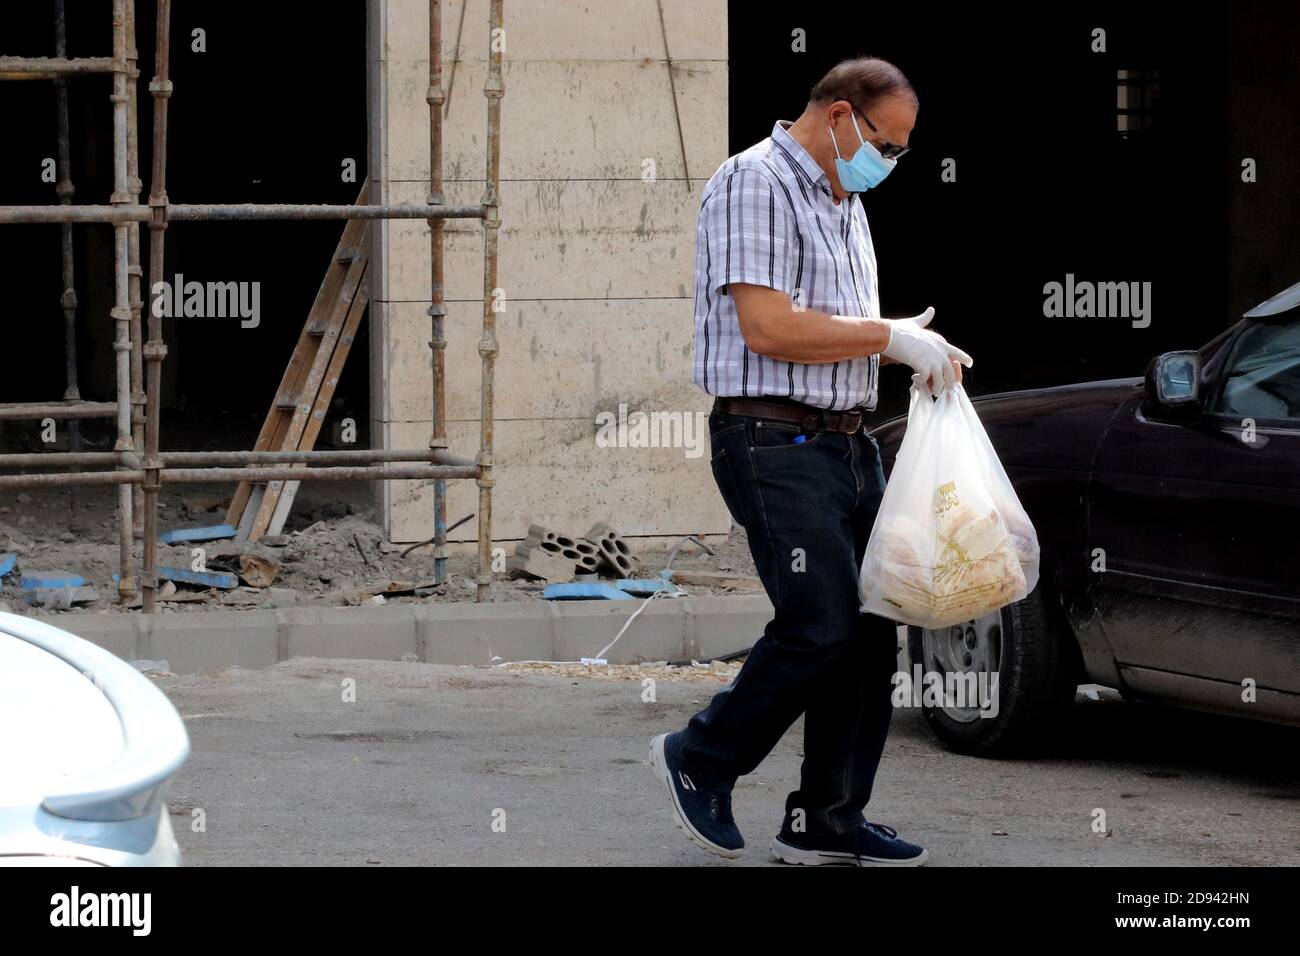 Amman, Jordan. 2nd Nov, 2020. A man wearing a face mask walks on a street in Amman, capital of Jordan, on Nov. 2, 2020. Jordan on Monday recorded 5,877 new coronavirus cases, the highest daily spike in the country so far, raising the tally to 81,743. Credit: Mohammad Abu Ghosh/Xinhua/Alamy Live News Stock Photo